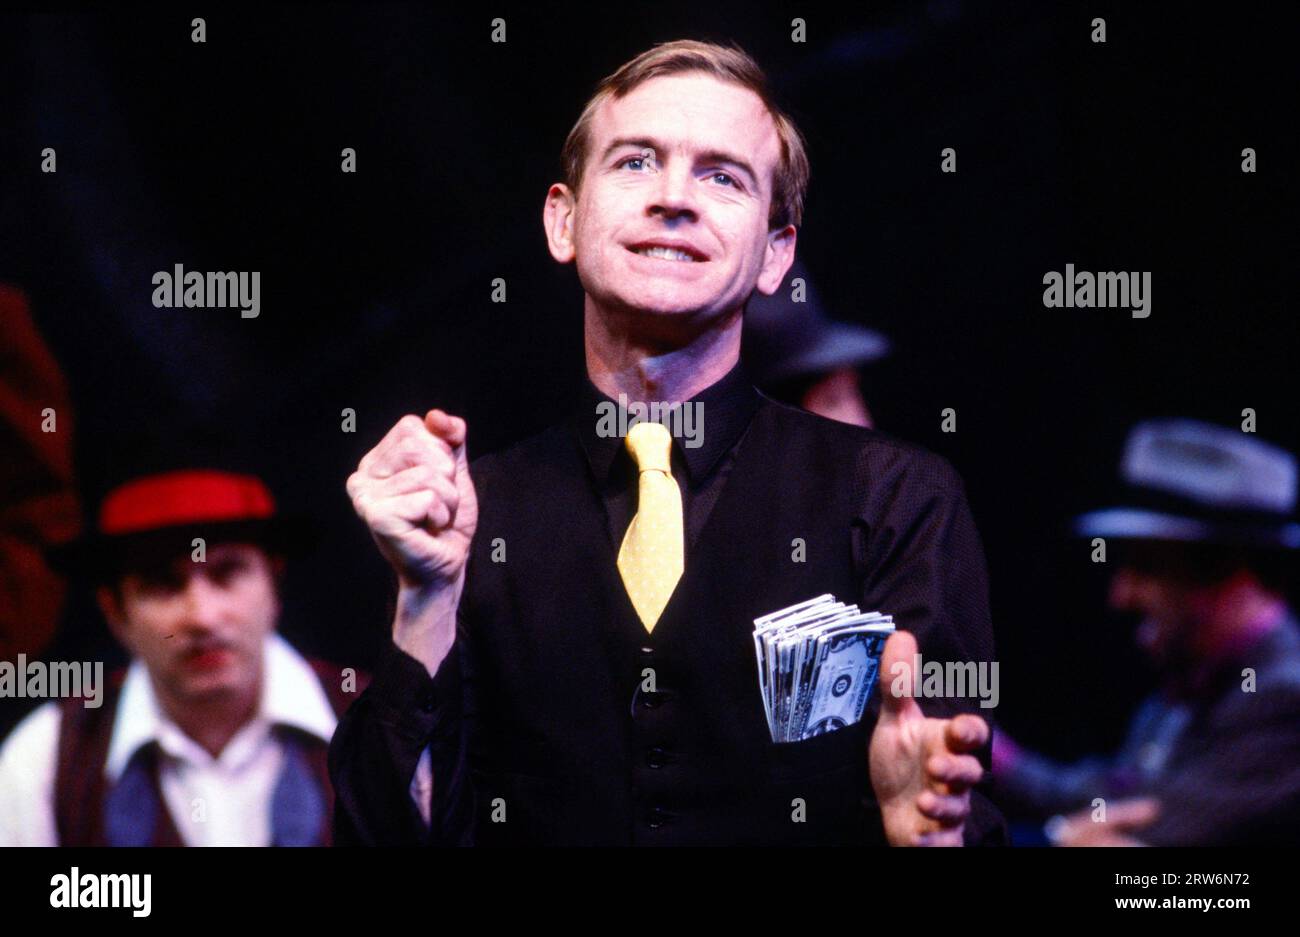 Ian Charleson (Sky Masterson) in GUYS AND DOLLS based on the story & characters by Damon Runyon at the Olivier Theatre, National Theatre, London SE1  09/03/1982  music & lyrics: Frank Loesser  book: Jo Swerling & Abe Burrows  set design: John Gunter  costumes: Sue Blane  lighting: David Hersey  choreography: David Toguri  director: Richard Eyre Stock Photo